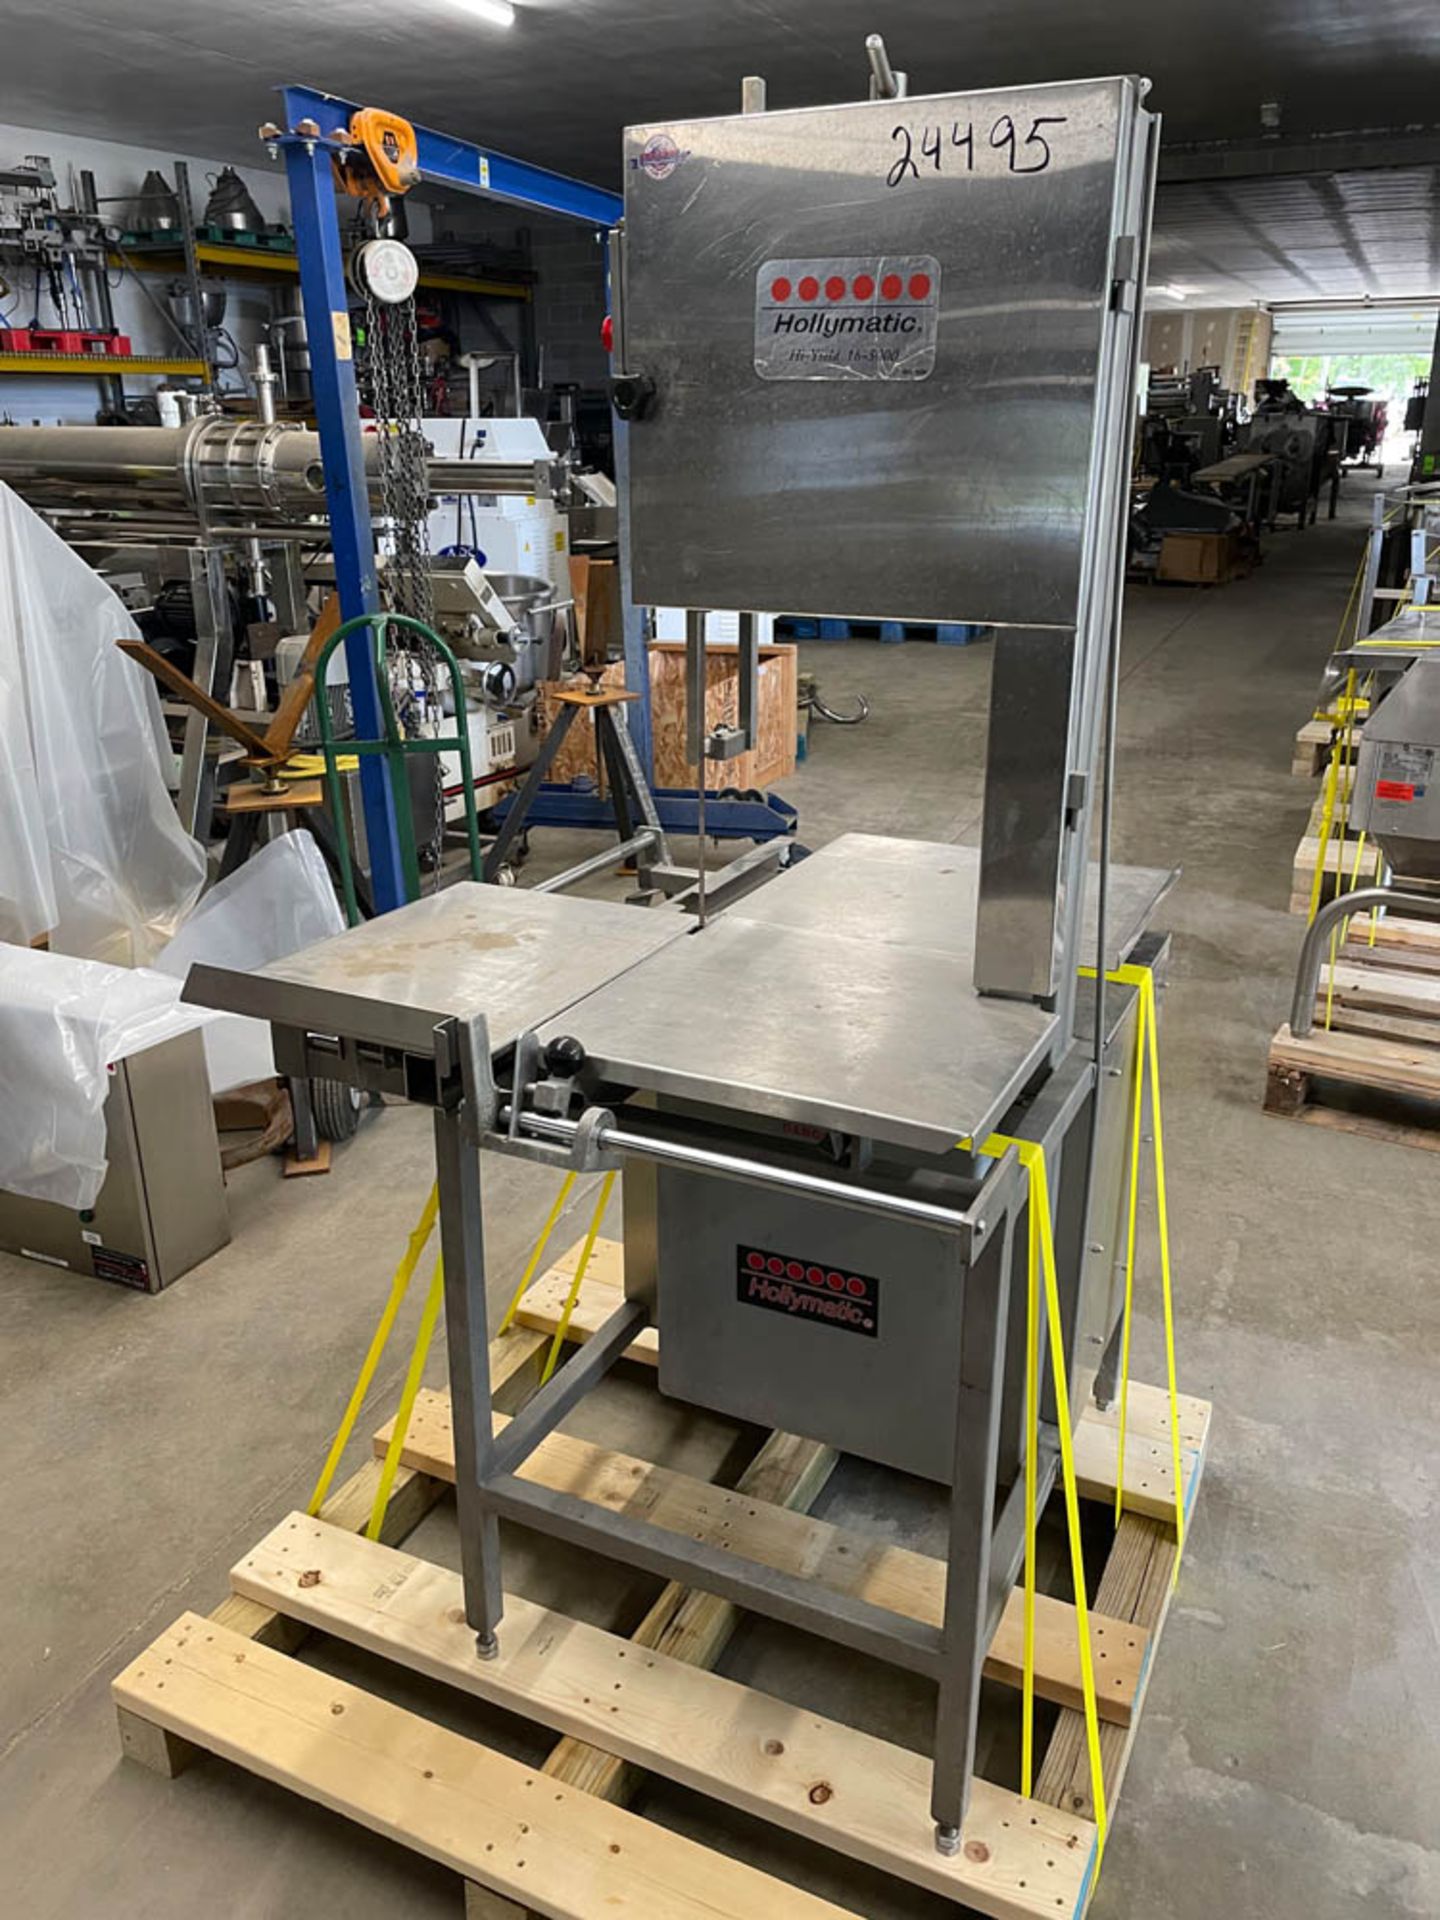 Hollymatic Hi-Yield 16-5000 Vertical Meat Saw, SN: 5672, 8.8 Amp, 3 HP, 200-240 V, 60 Hz. 11 2022